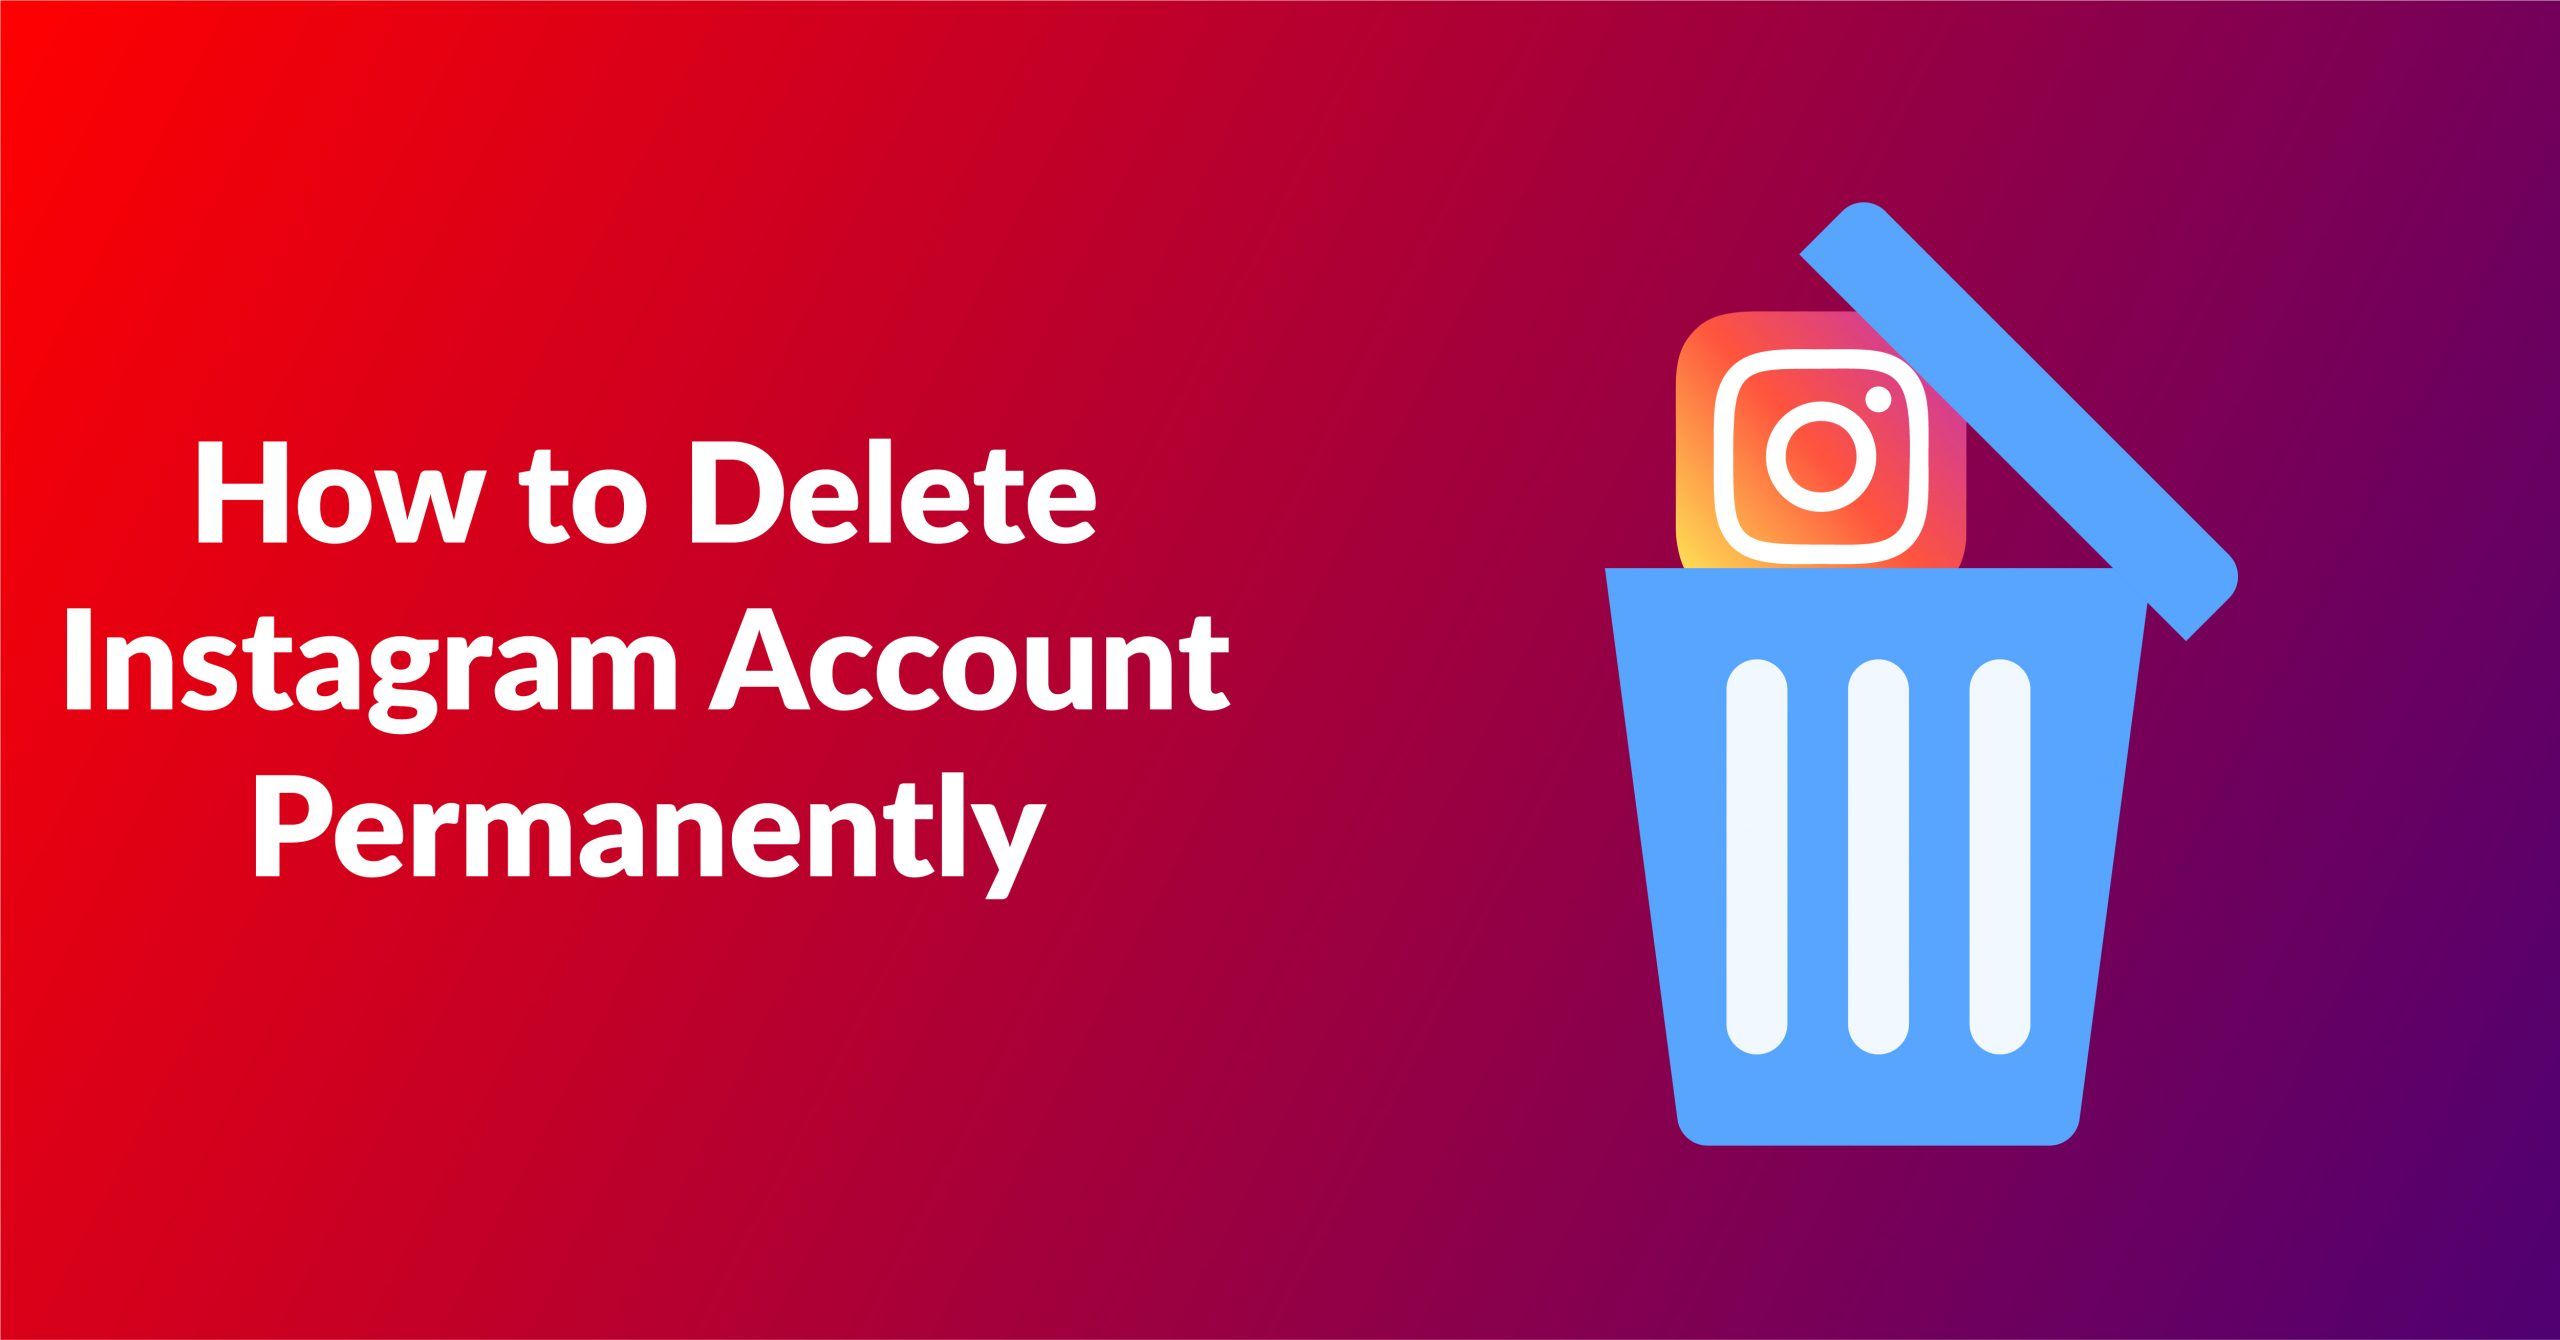 How to Permanently Delete or Temporary disable Instagram Account in 2021